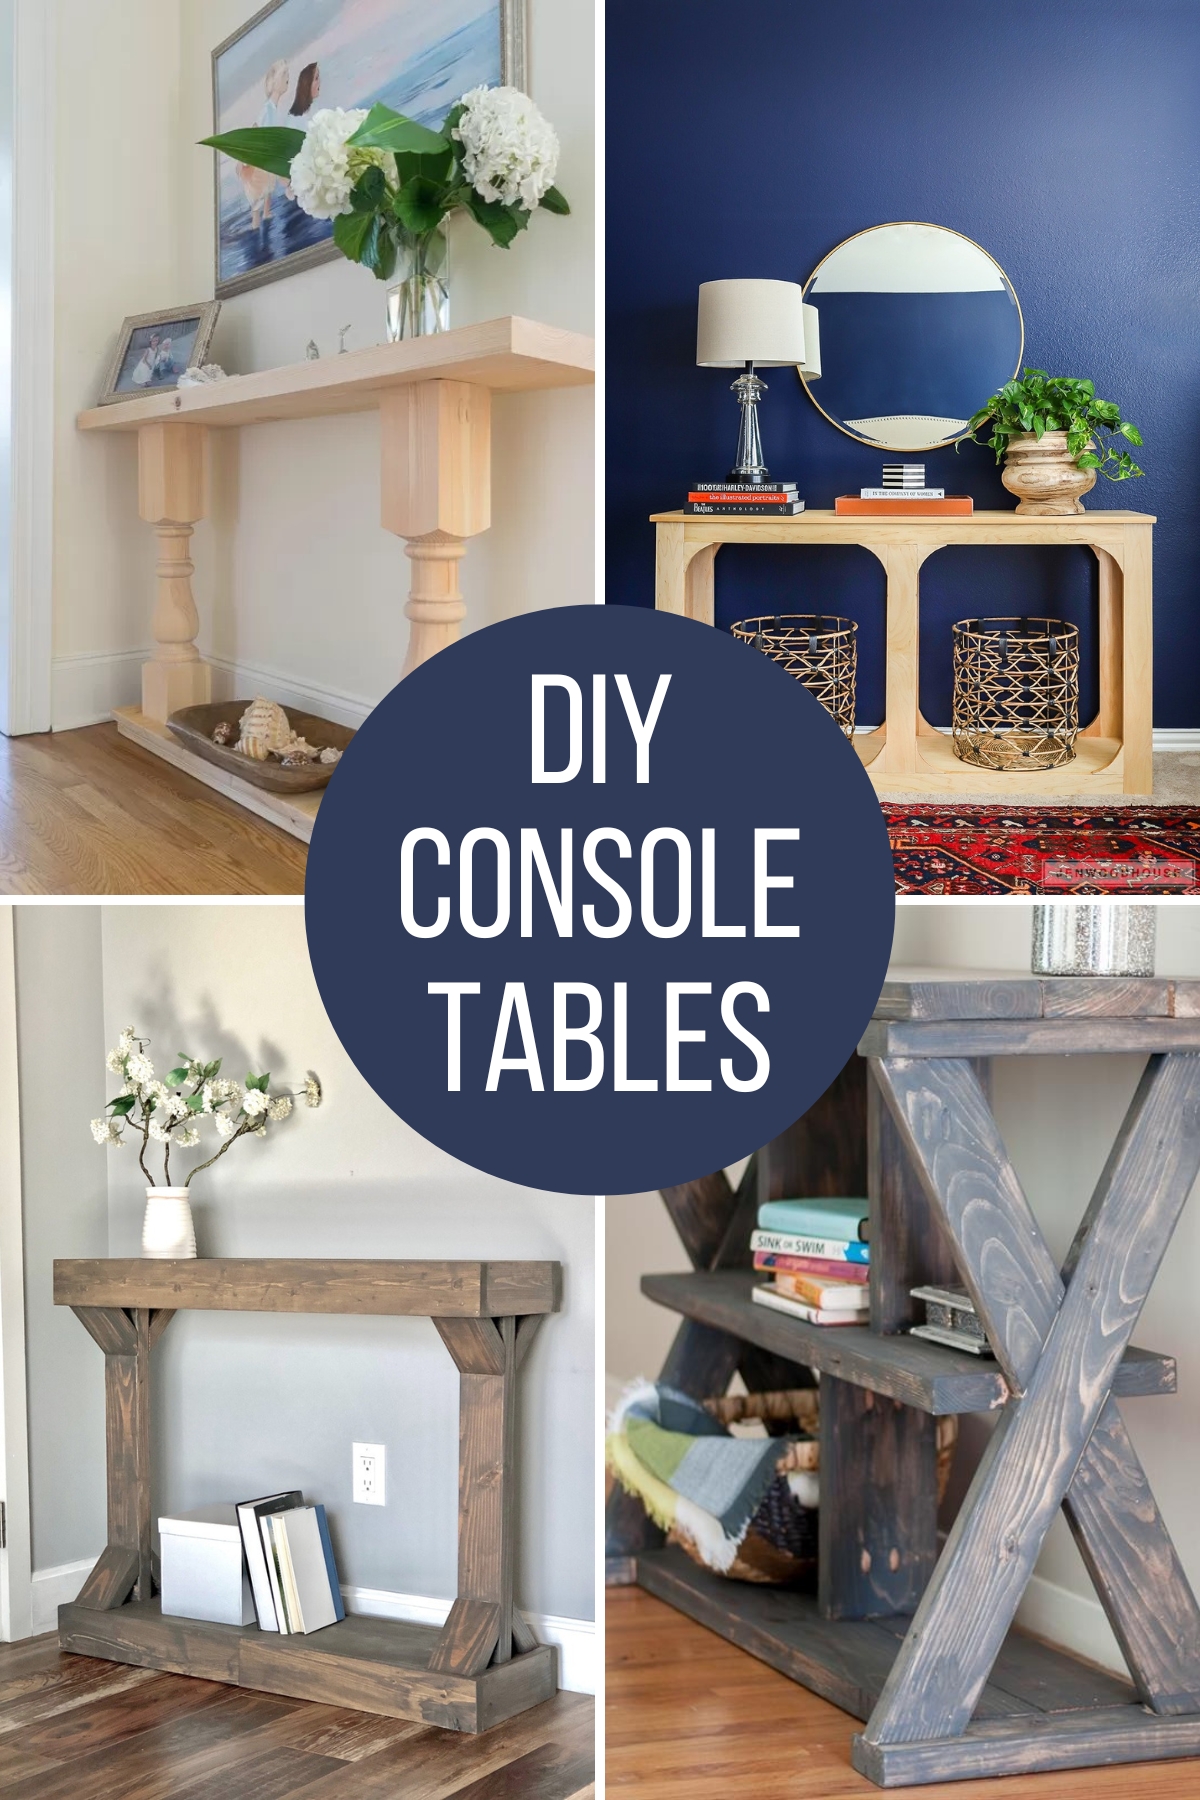 20 Creative DIY Console Table Designs You'll Love - The Handyman's Daughter